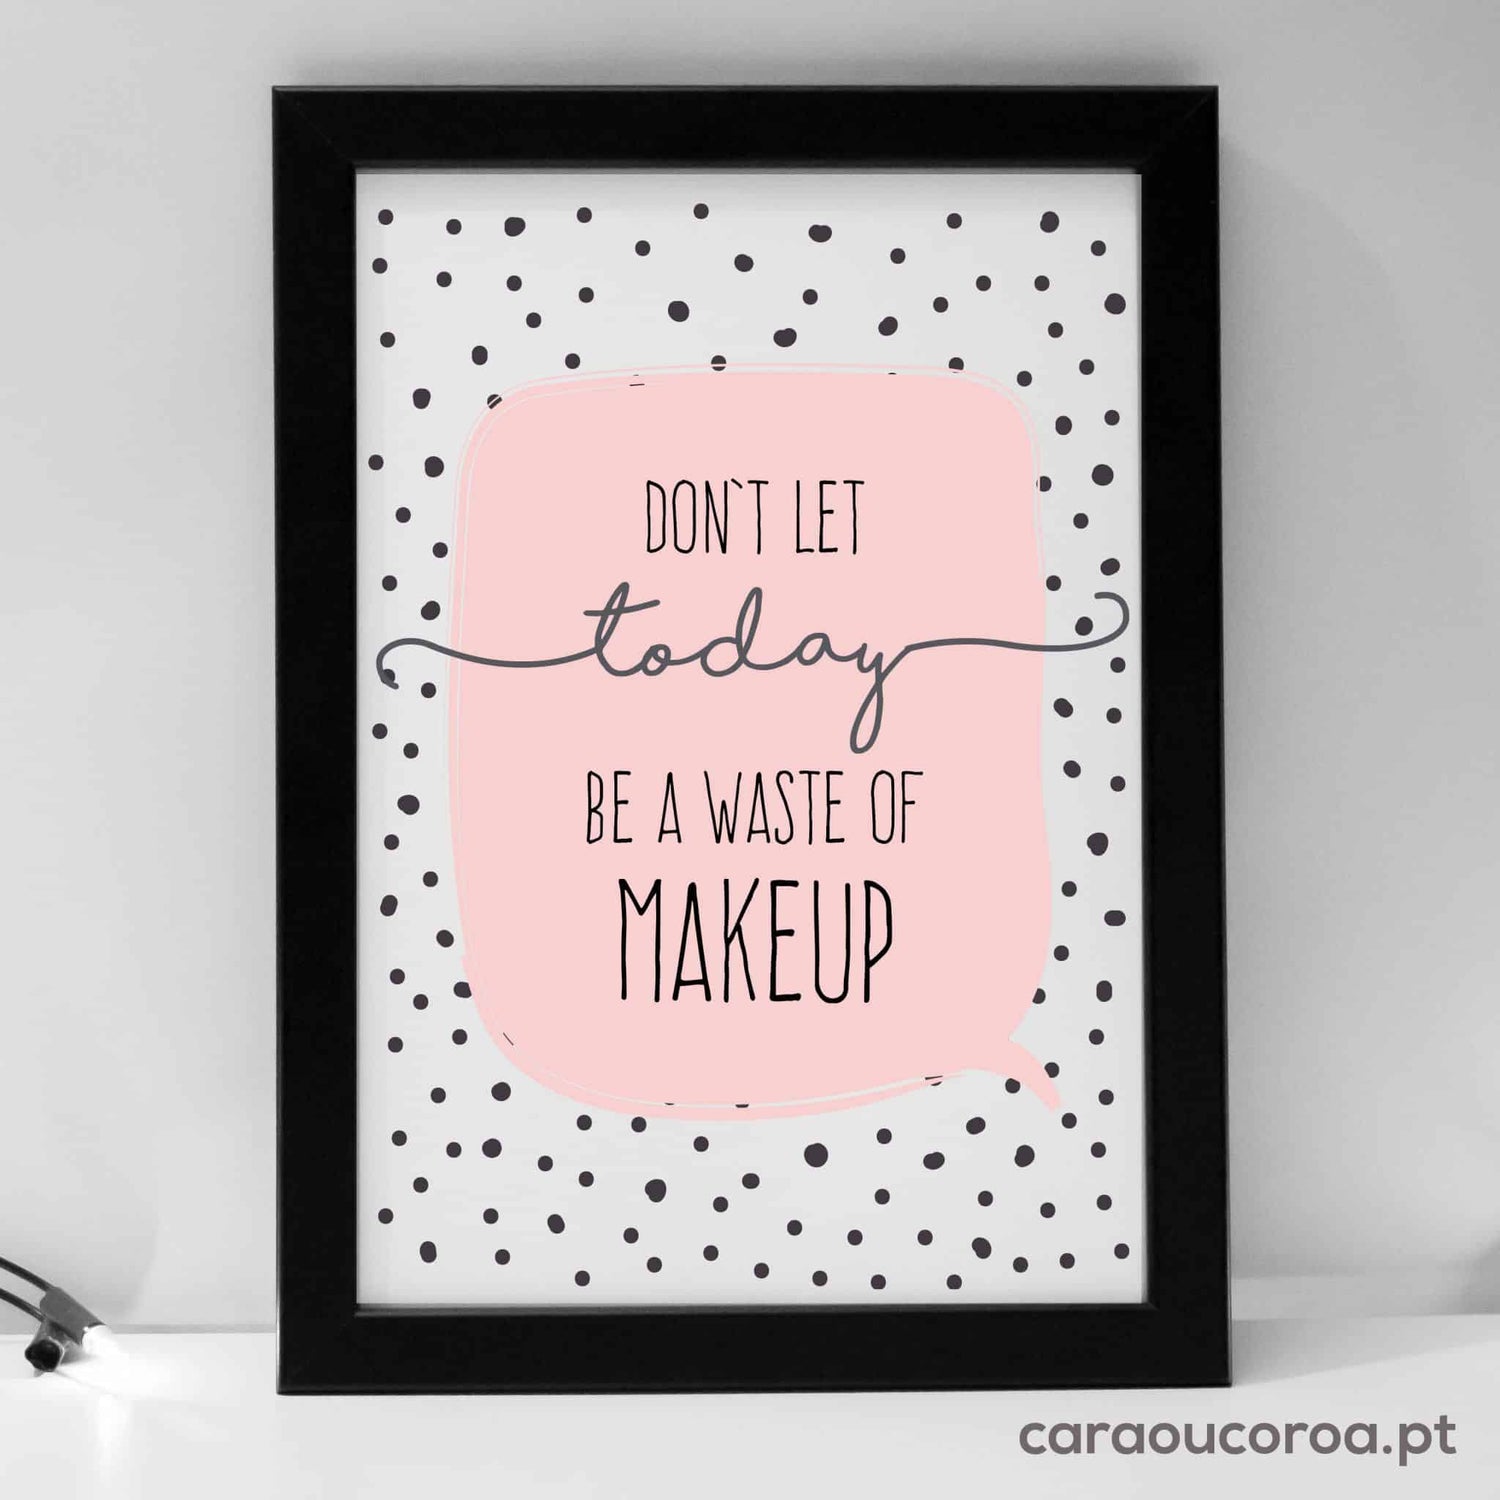 Quadro "Don't Let Today Be a Waste of Makeup" - caraoucoroa.pt